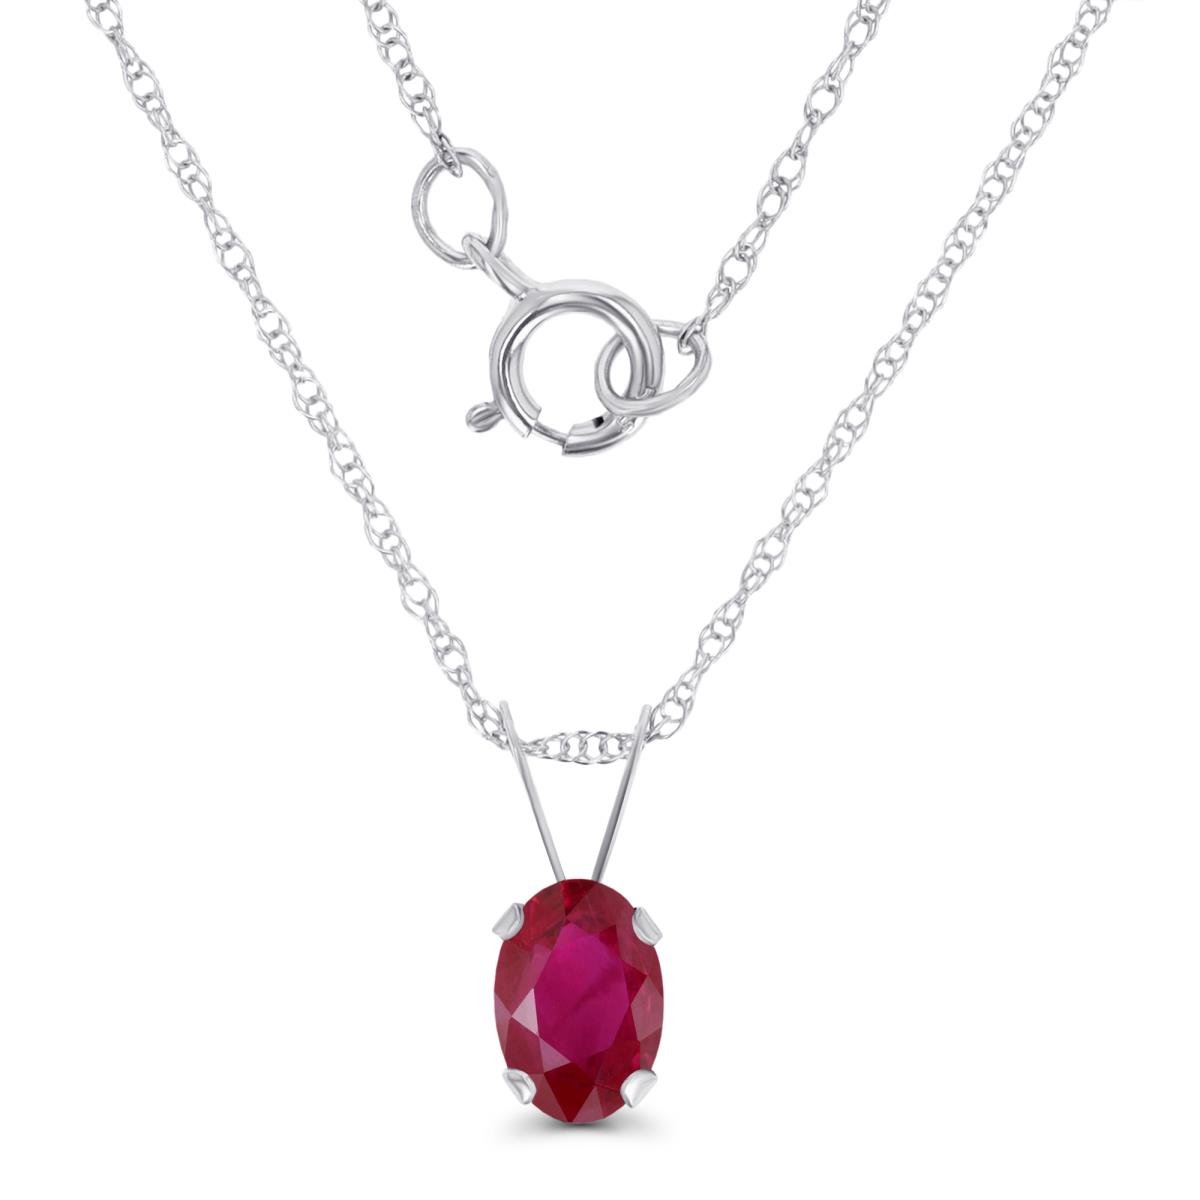 14K White Gold 6x4mm Oval Glass Filled Ruby 18" Rope Chain Necklace